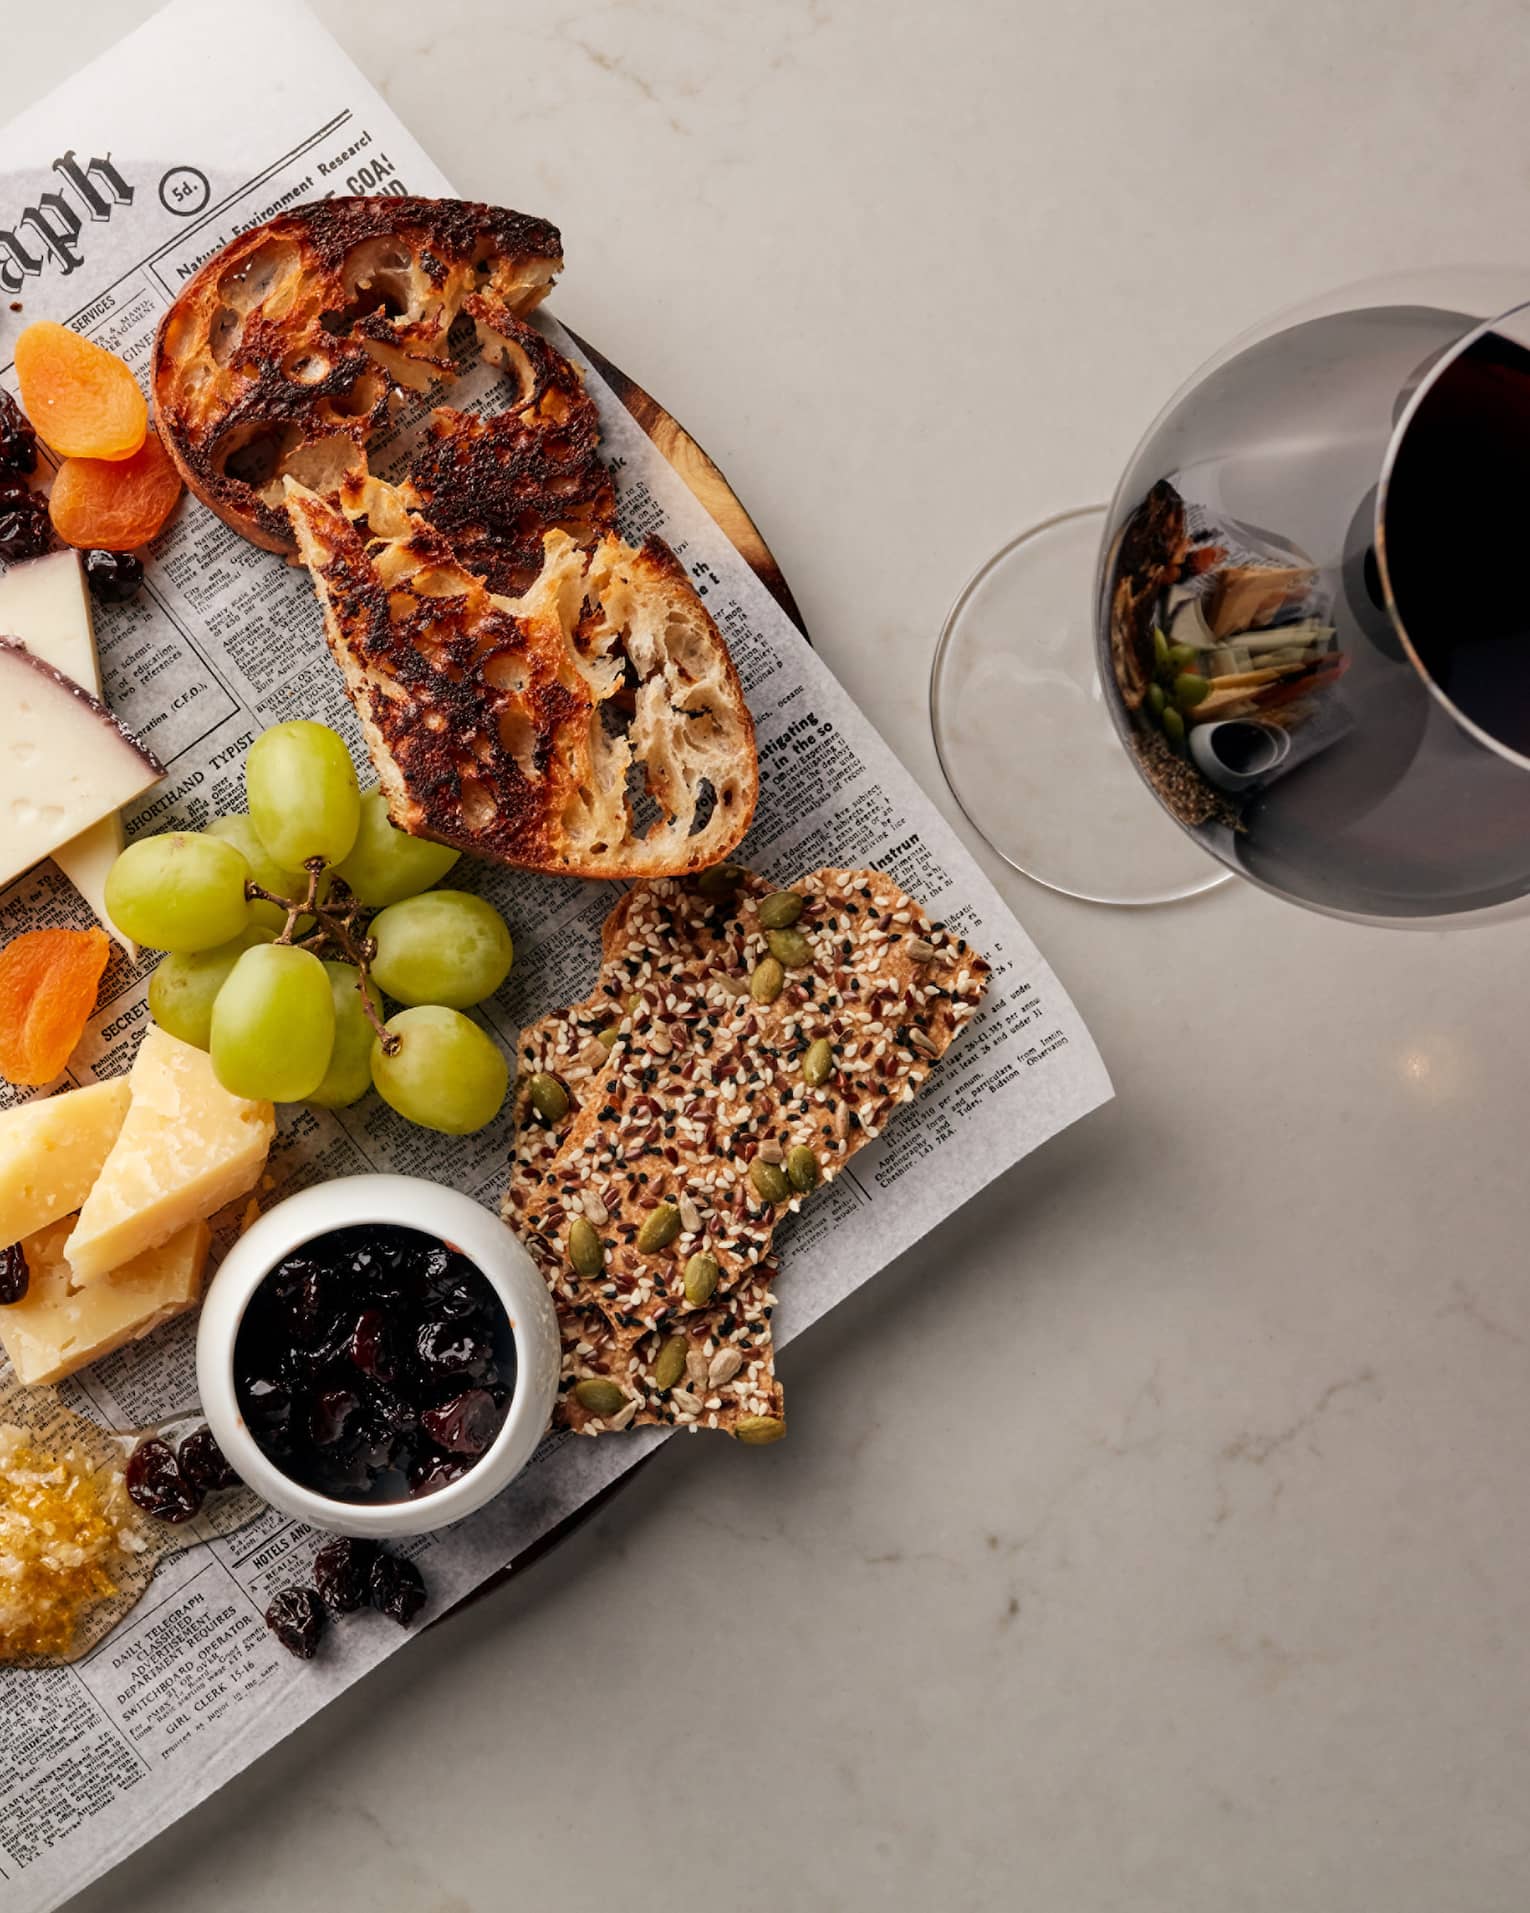 Cheese, grapes, crackers and bread on newspaper on platter next to glass of red wine